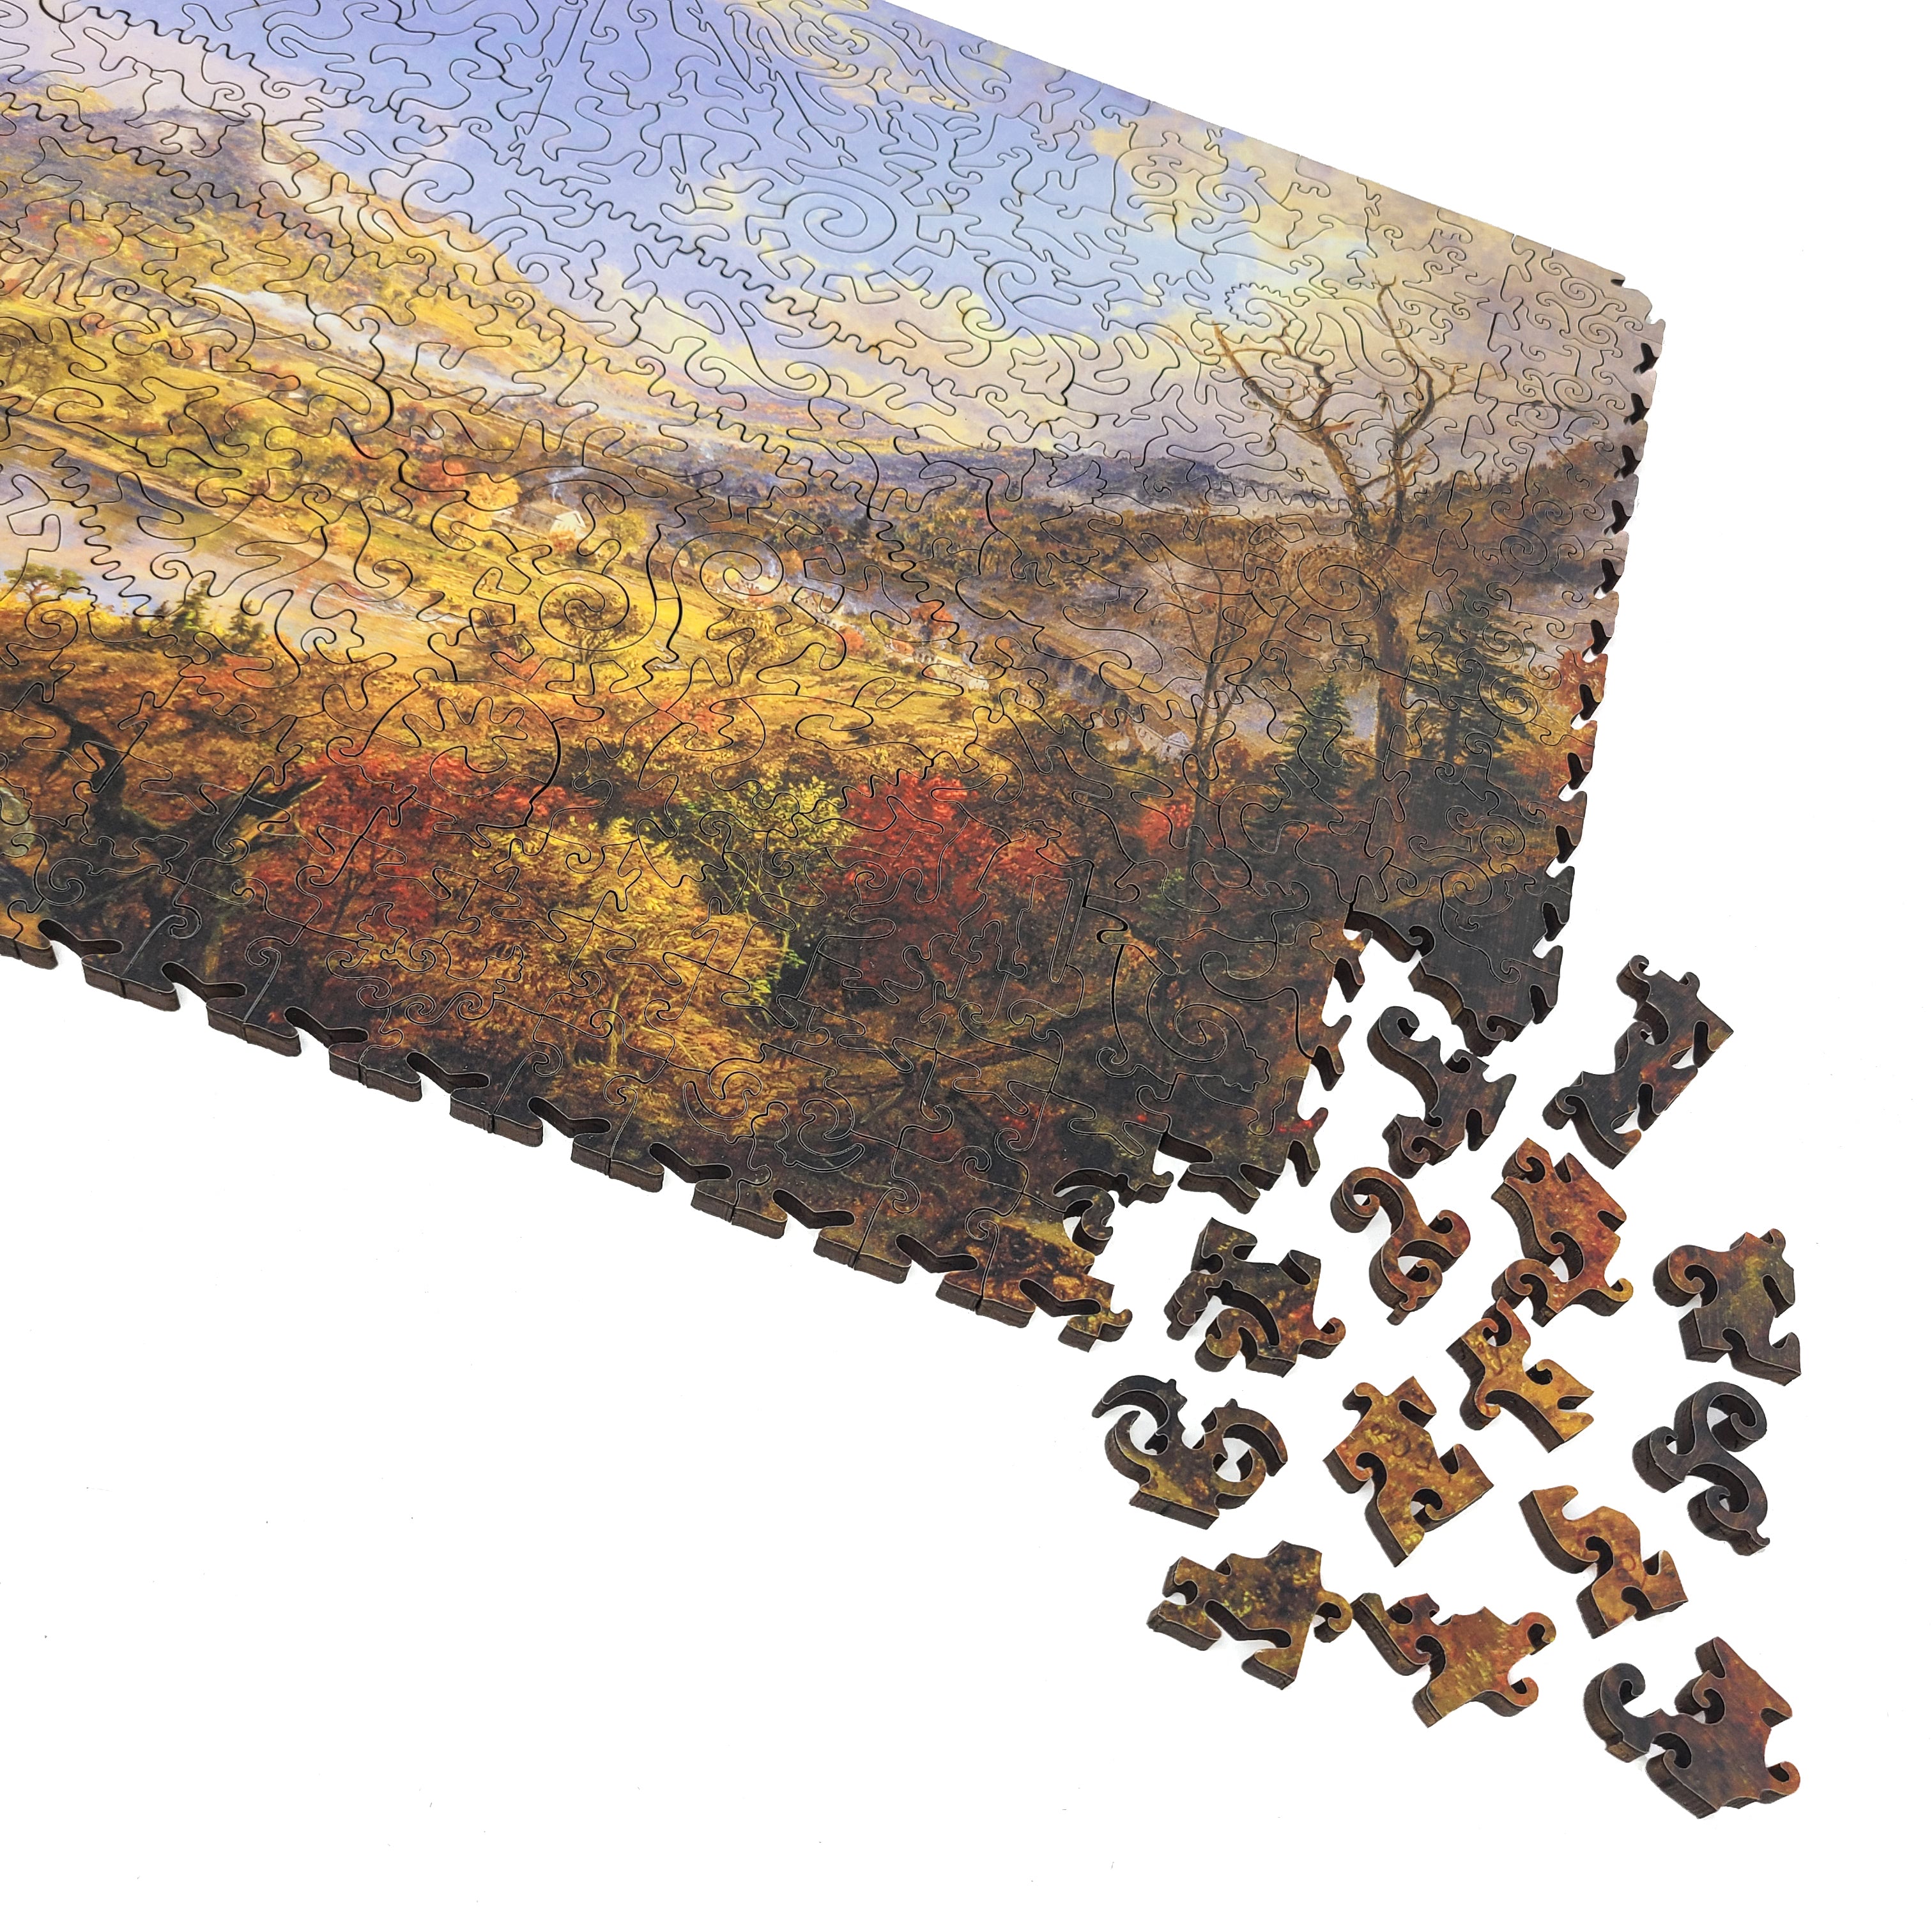 Wooden Jigsaw Puzzle with Uniquely Shaped Pieces for Adults - 440 